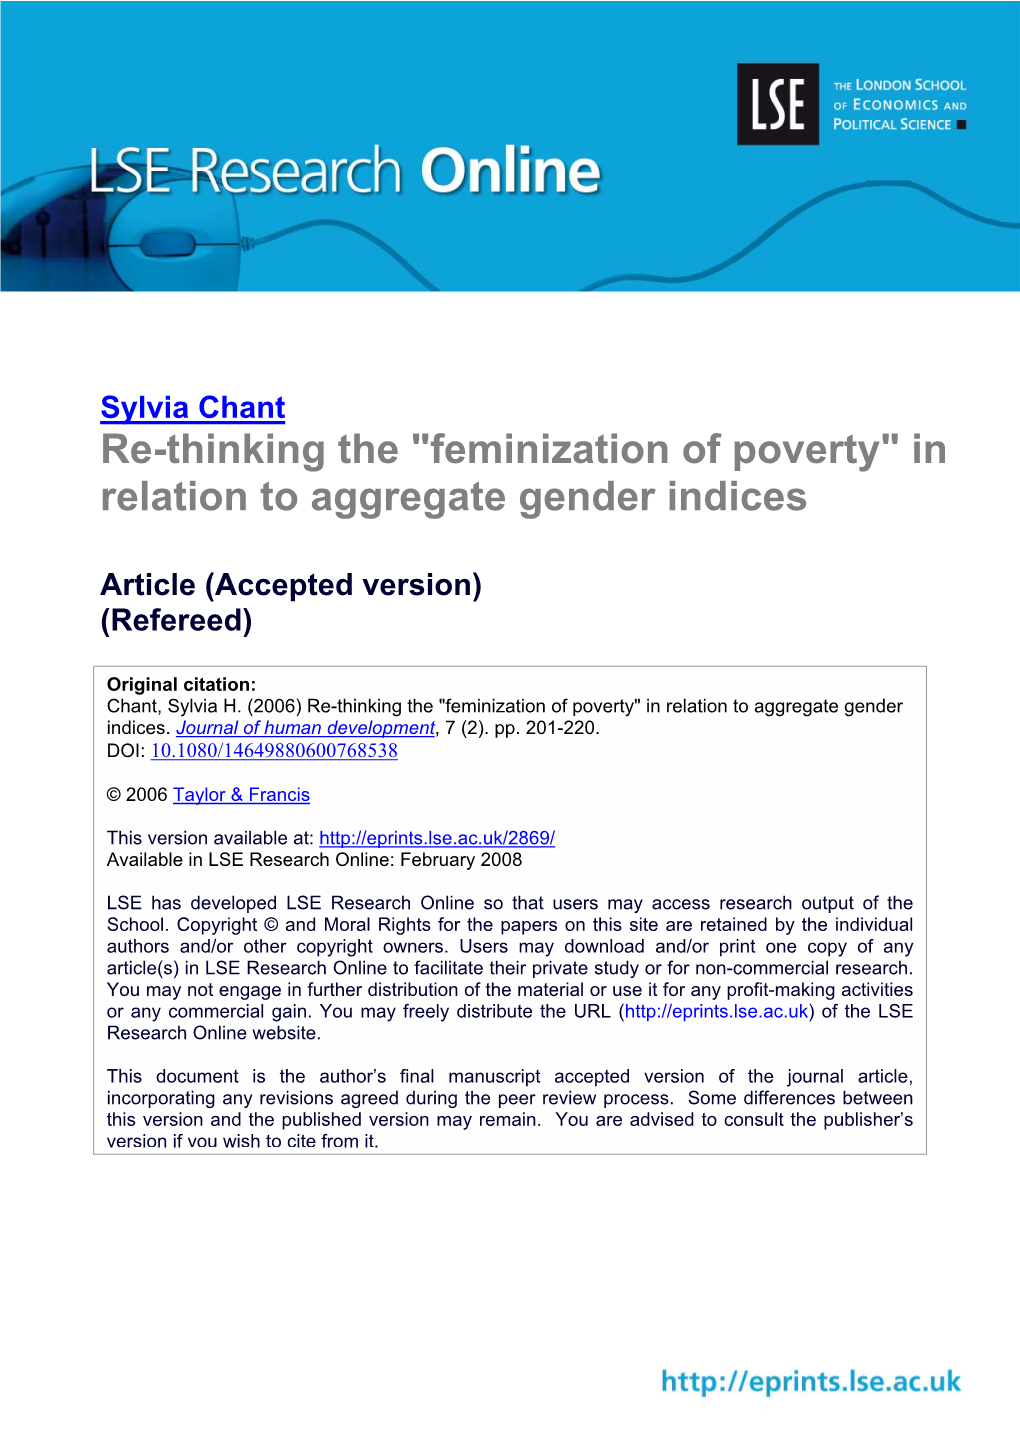 Re-Thinking the "Feminization of Poverty" in Relation to Aggregate Gender Indices